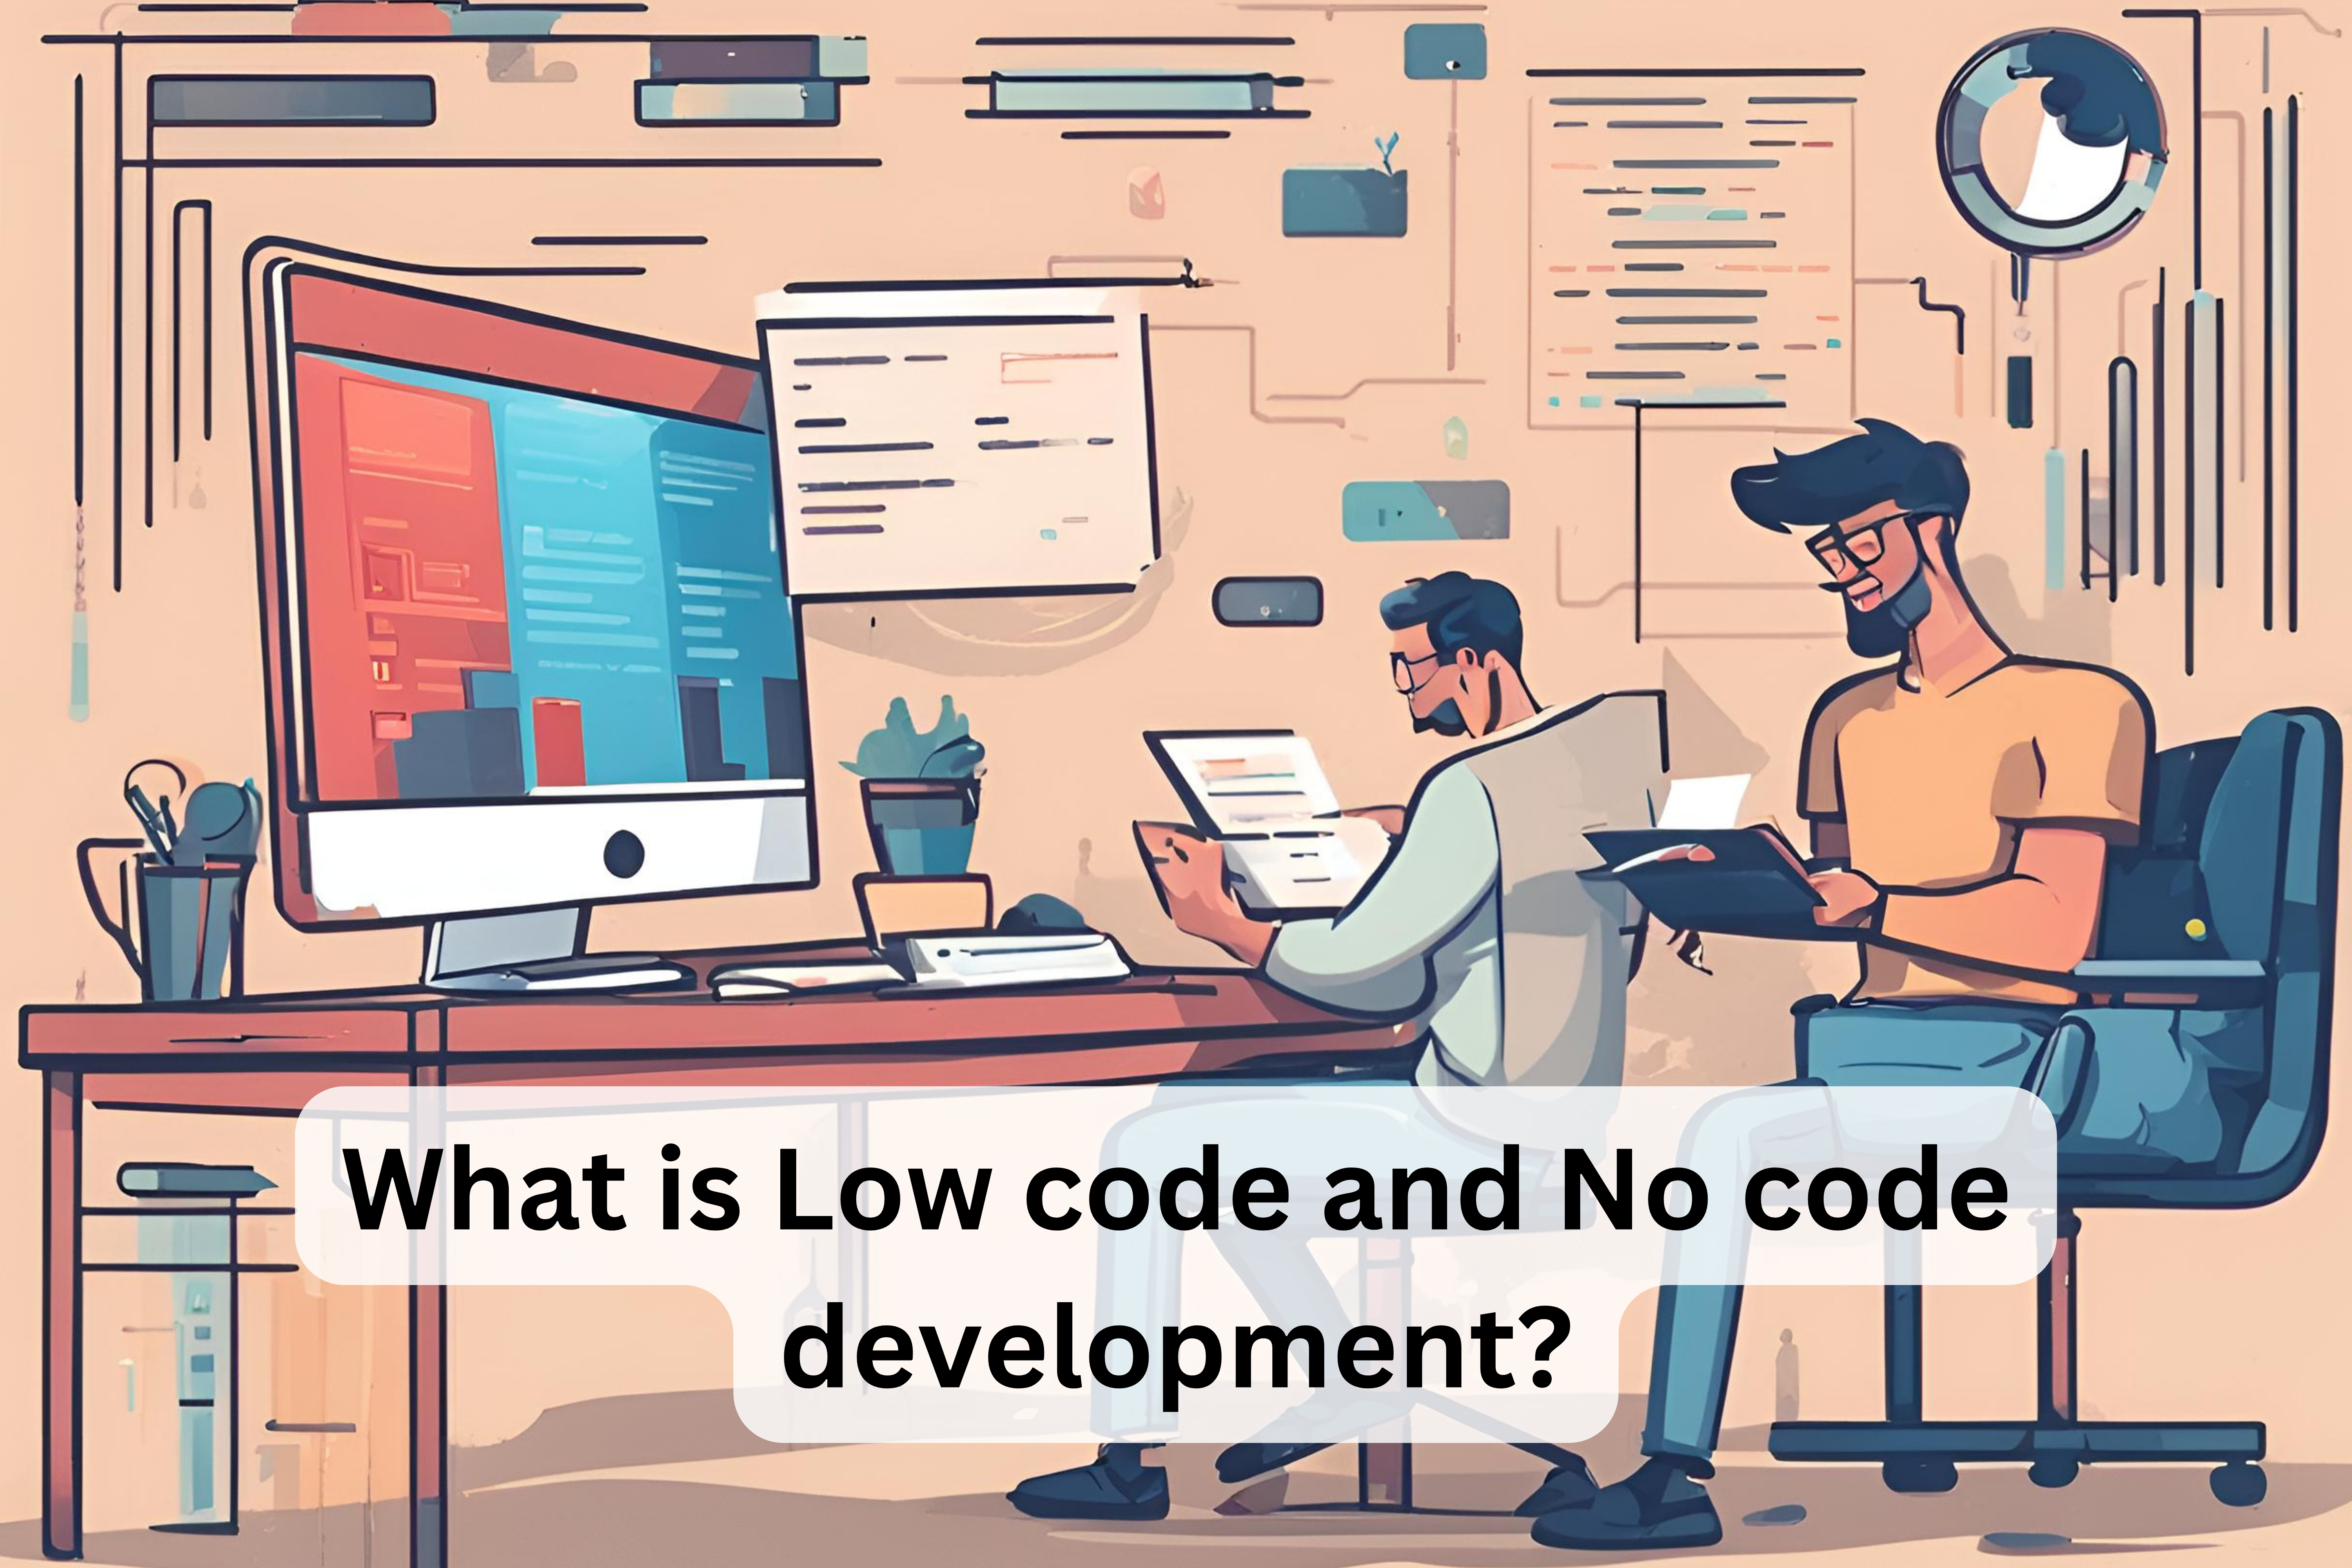 Low code and No code development